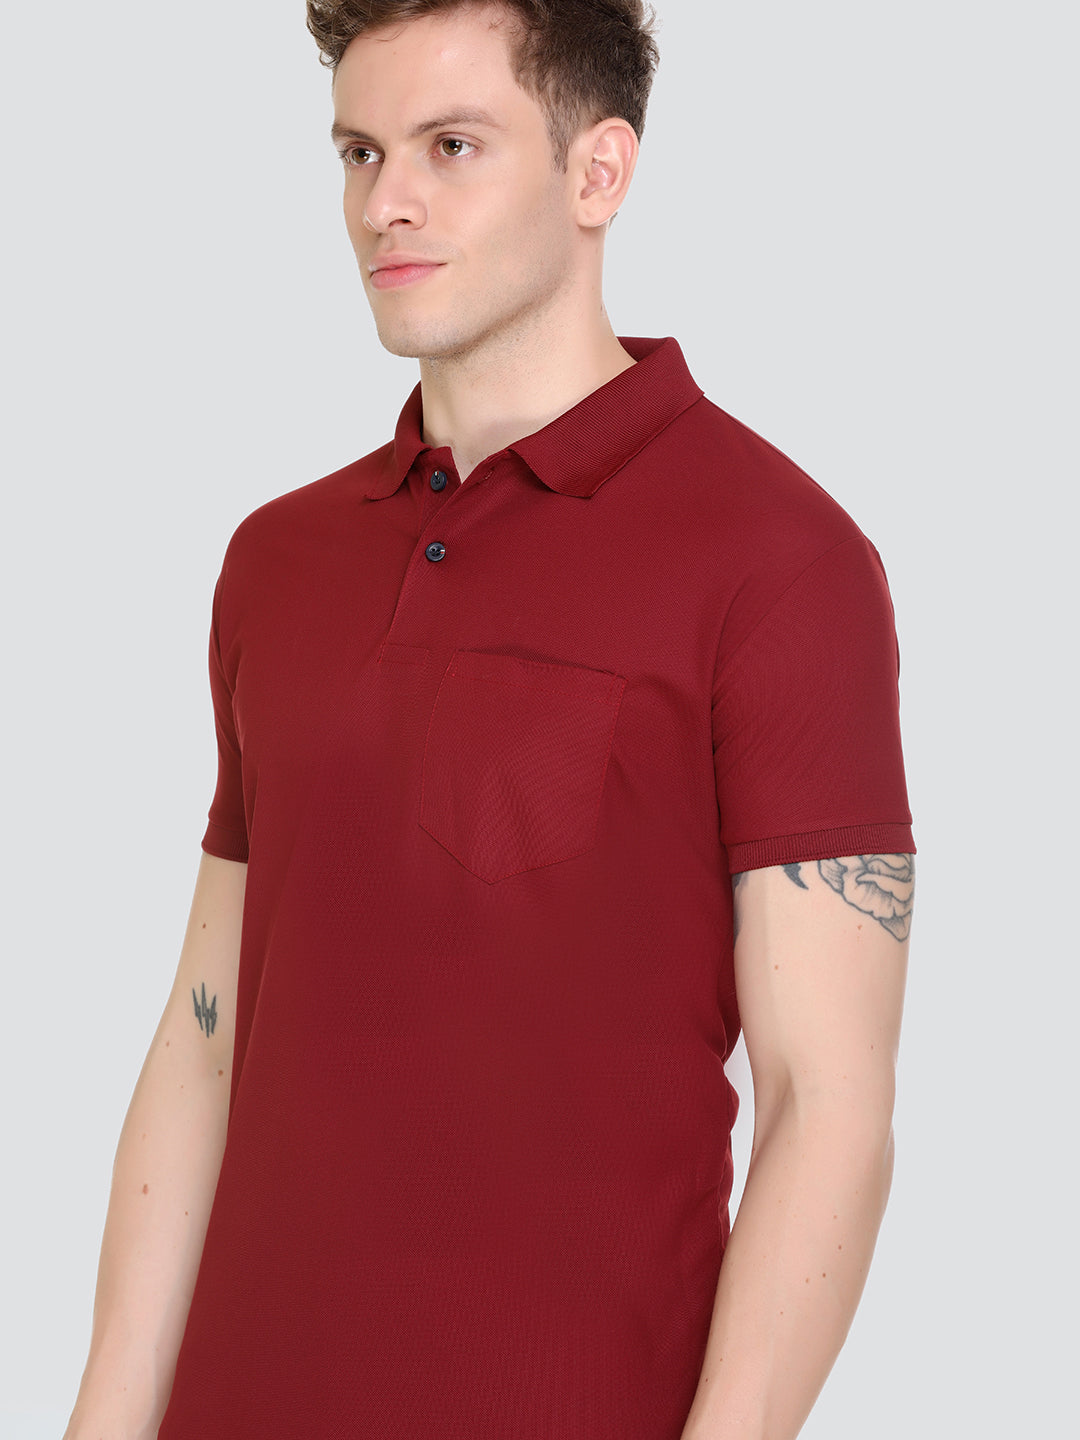 Comfortable Jinxer Maroon Dry Fit Polo Neck T Shirt for men online in India